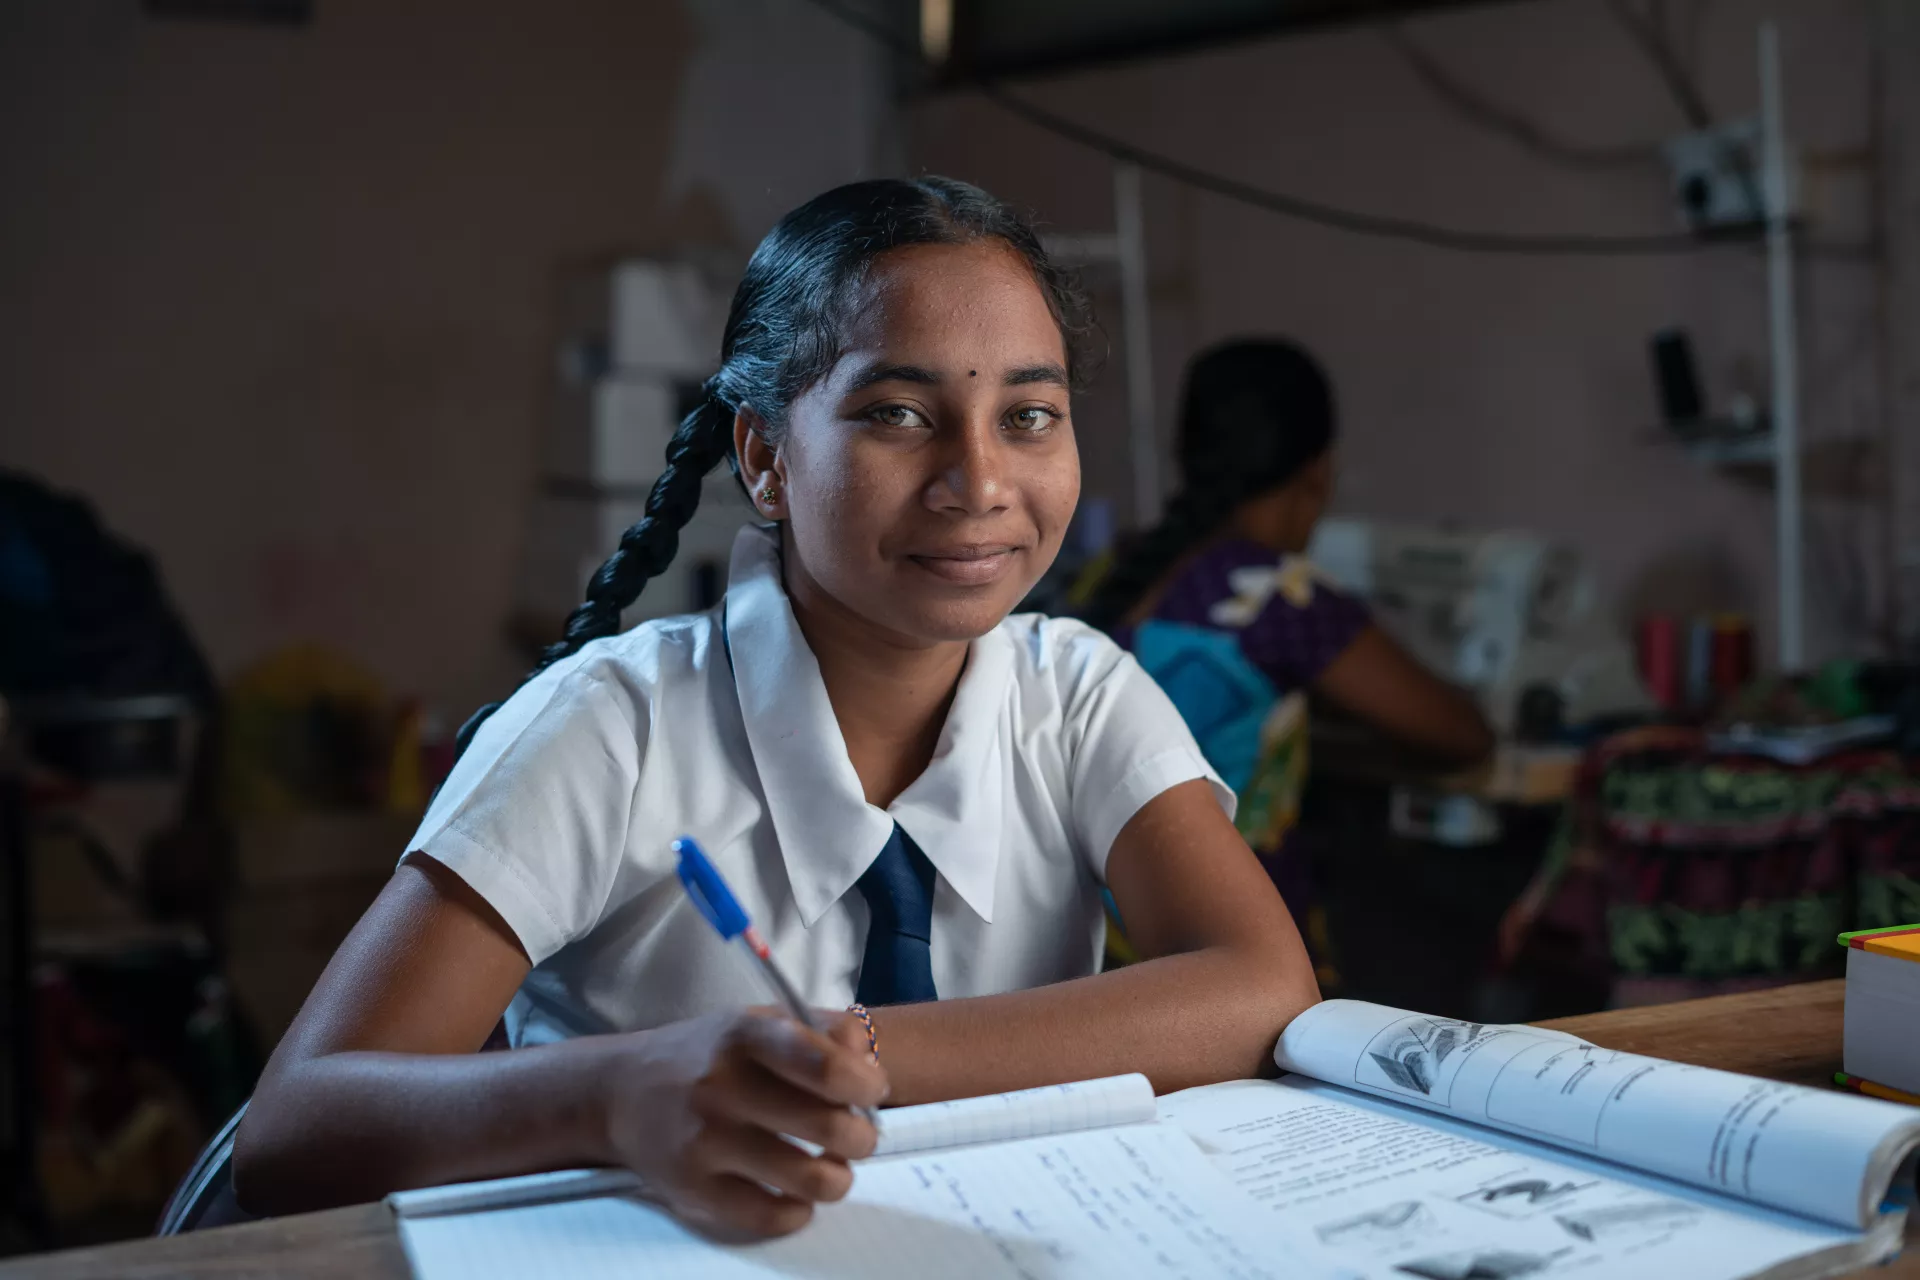 Yathusia looks confidently at the camera in her school uniform: braids (black hair), a white button-up and black tie. On the desk in front of her a textbook and notebook are open and pen is in her hand. In the dark, blurred background another student is sitting with her back to the camera.